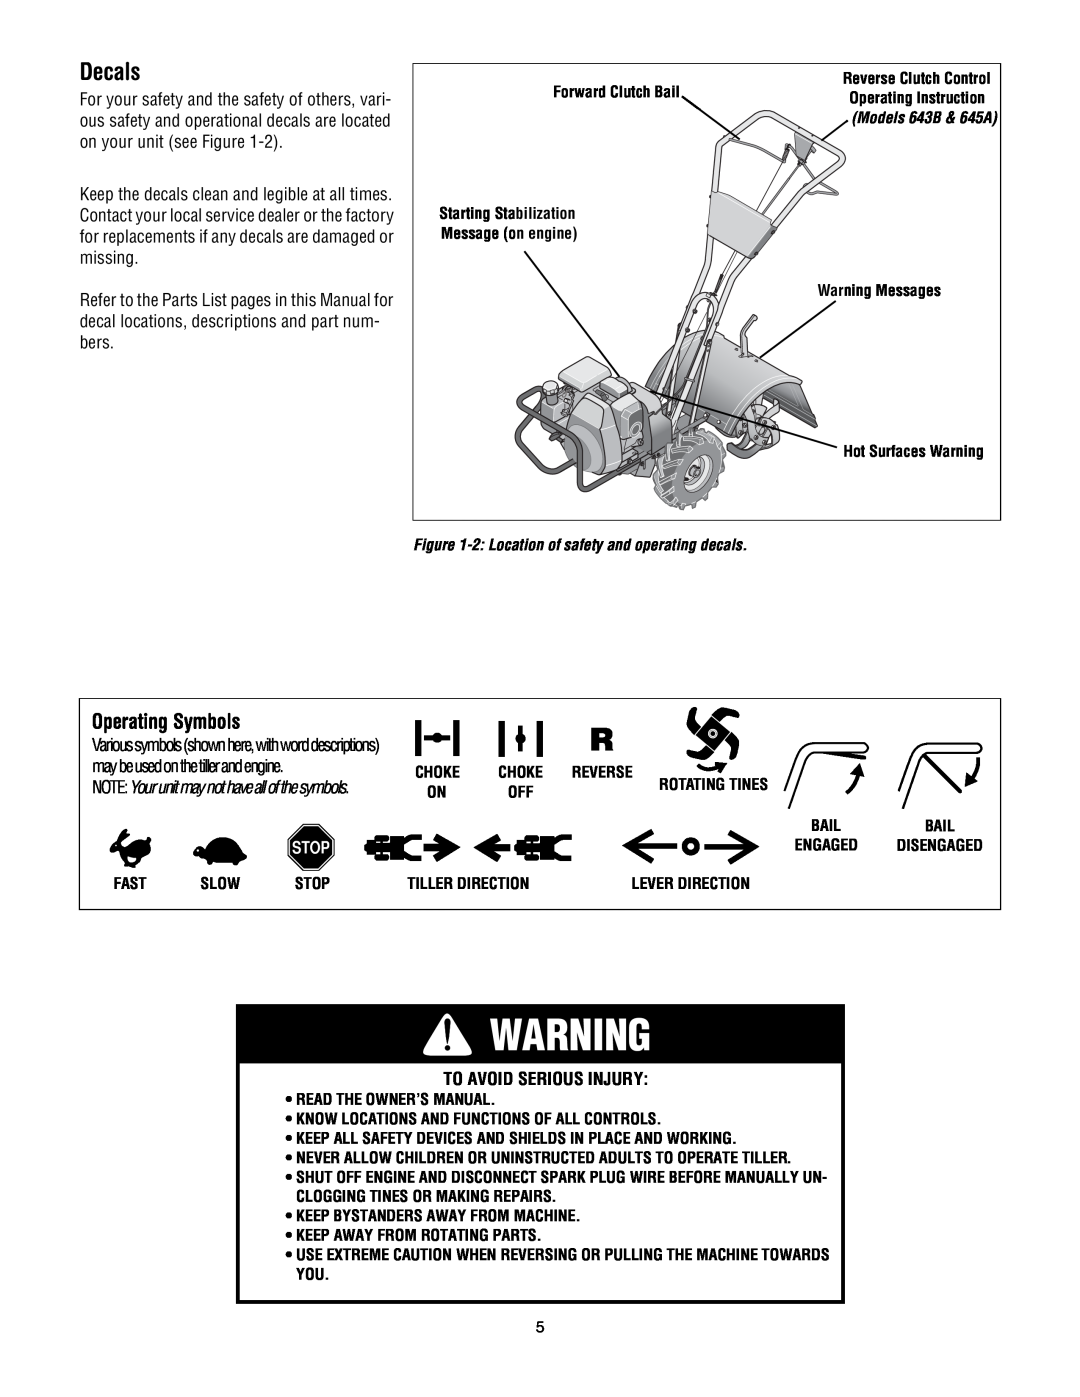 Troy-Bilt 643D-Tuffy/Bronco, 643B, 645A - Super Bronco manual Decals, Operating Symbols, To Avoid Serious Injury 